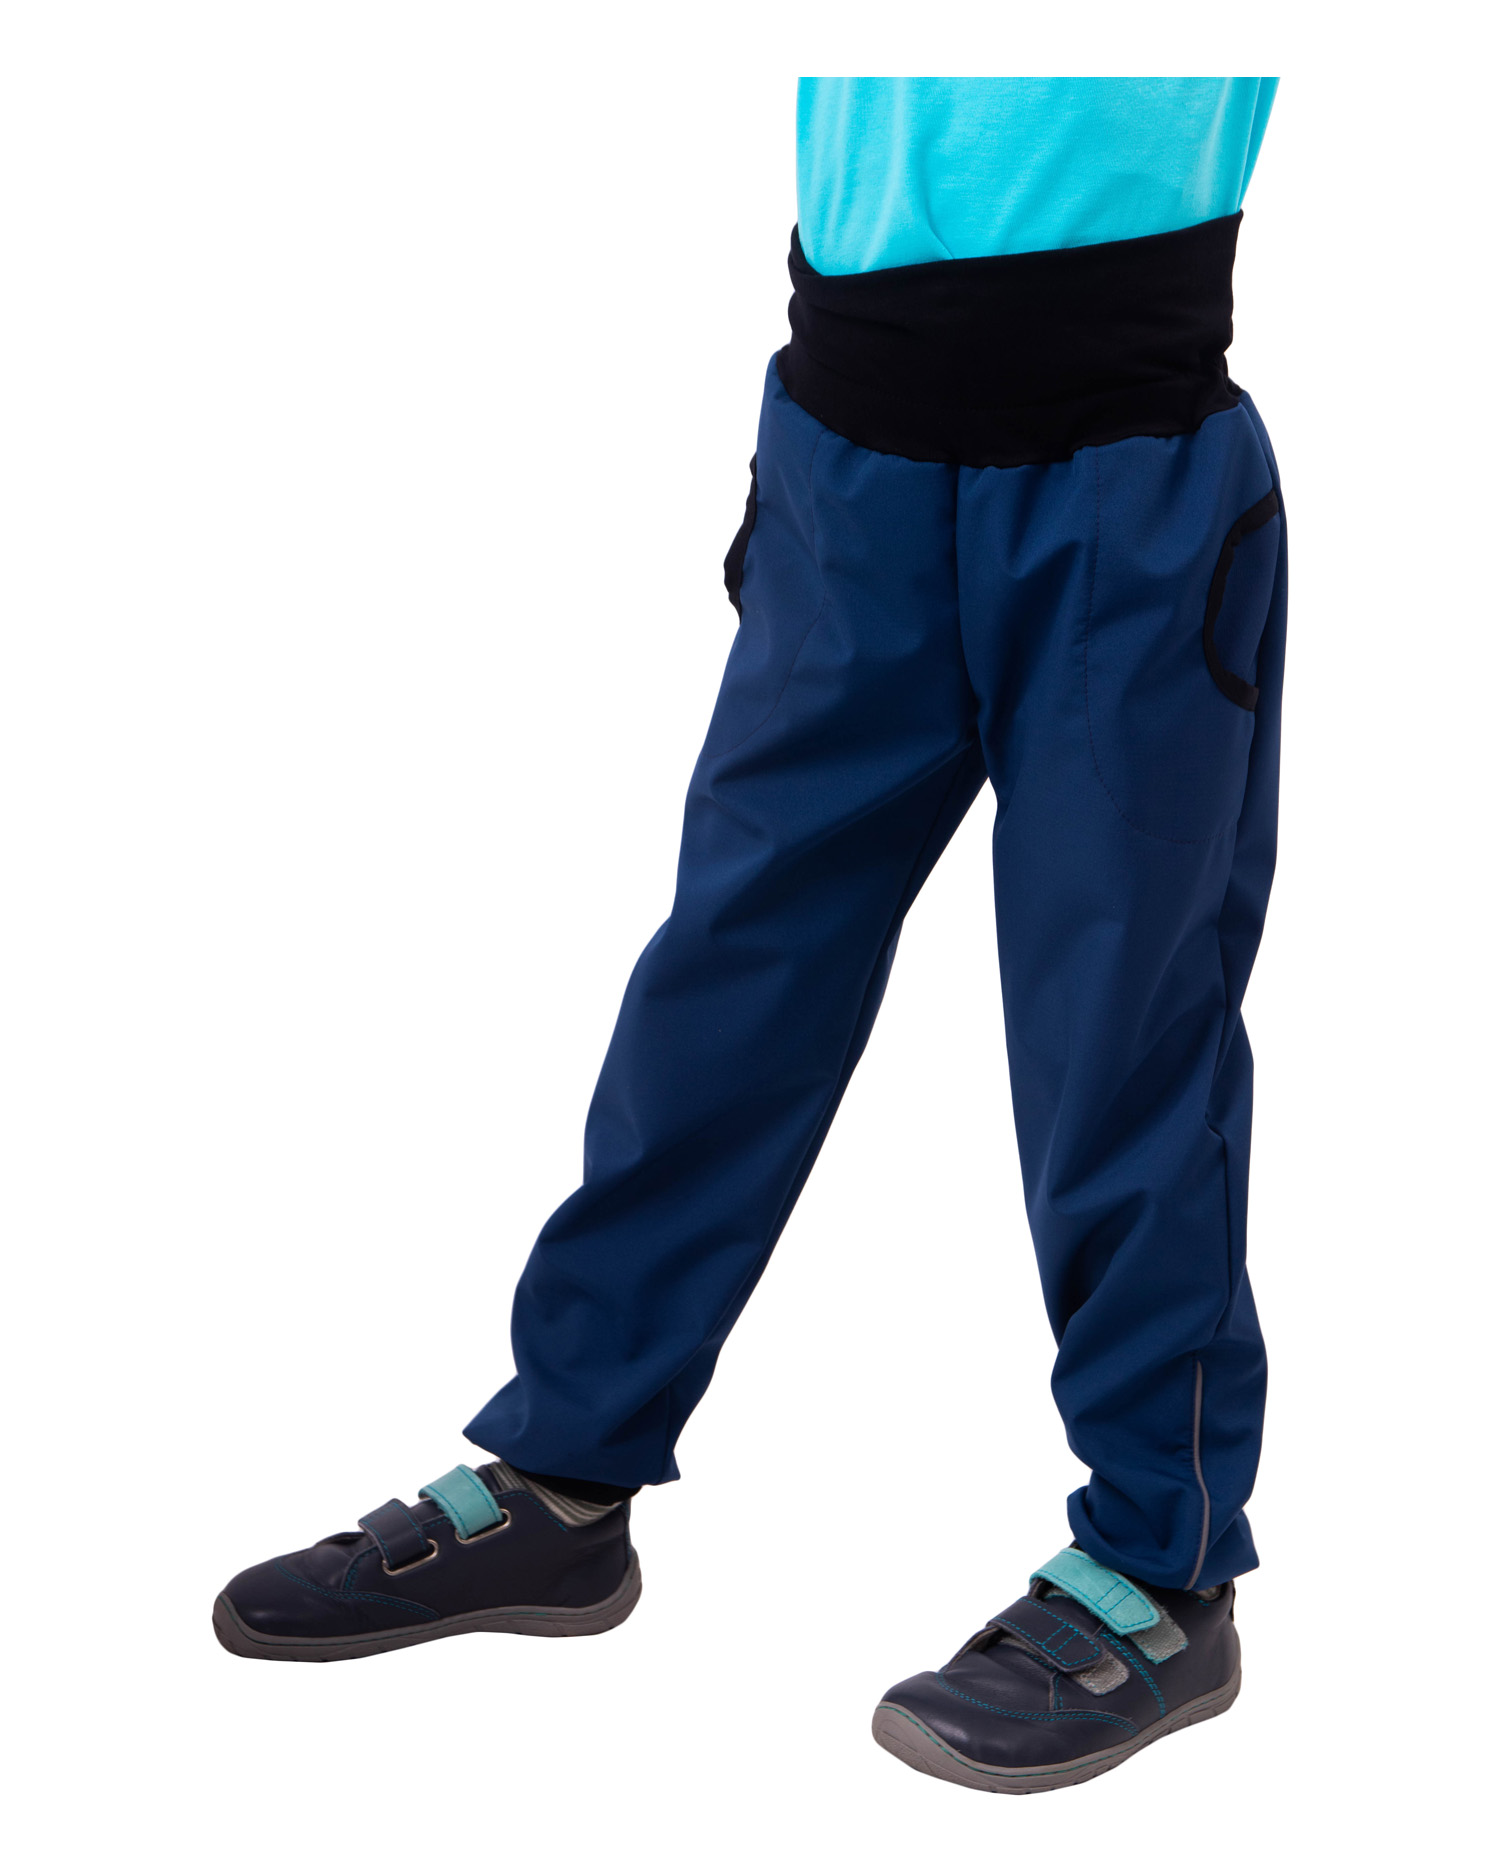 Spring/summer softshell trousers for kids, blue